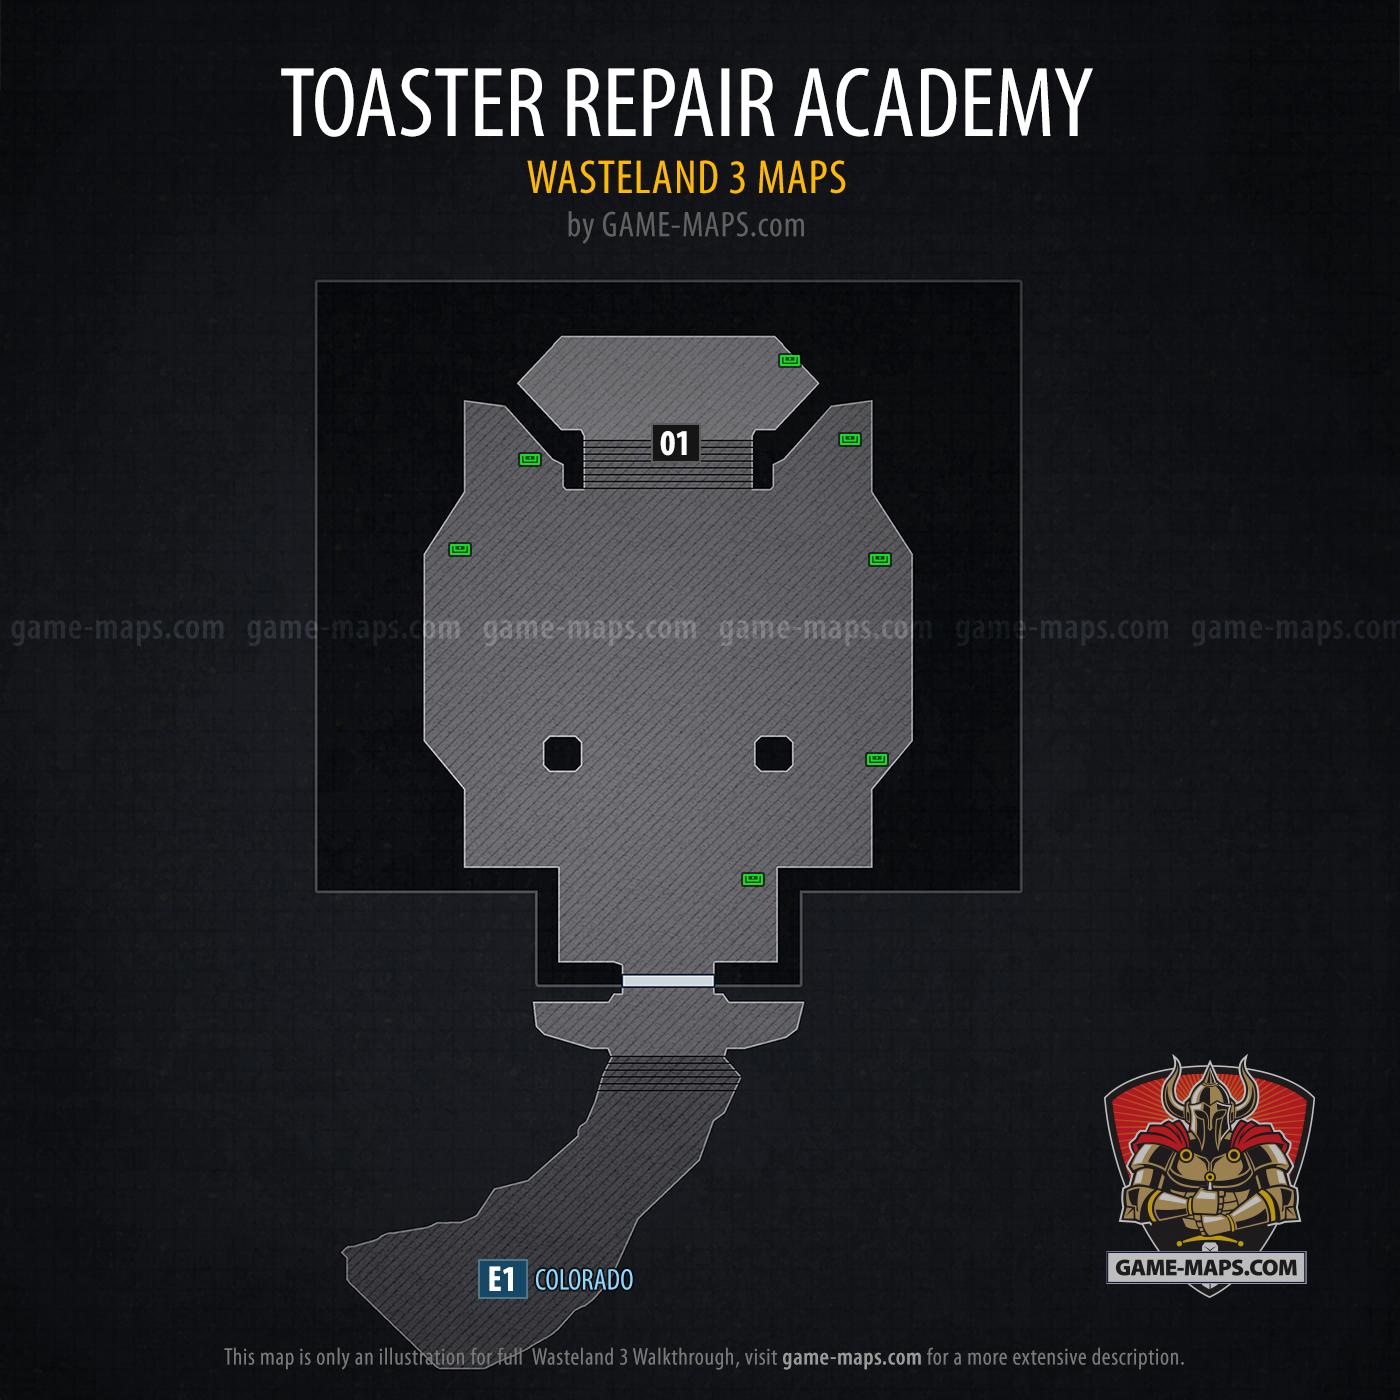 Map of Toaster Repair Academy in Wasteland 3